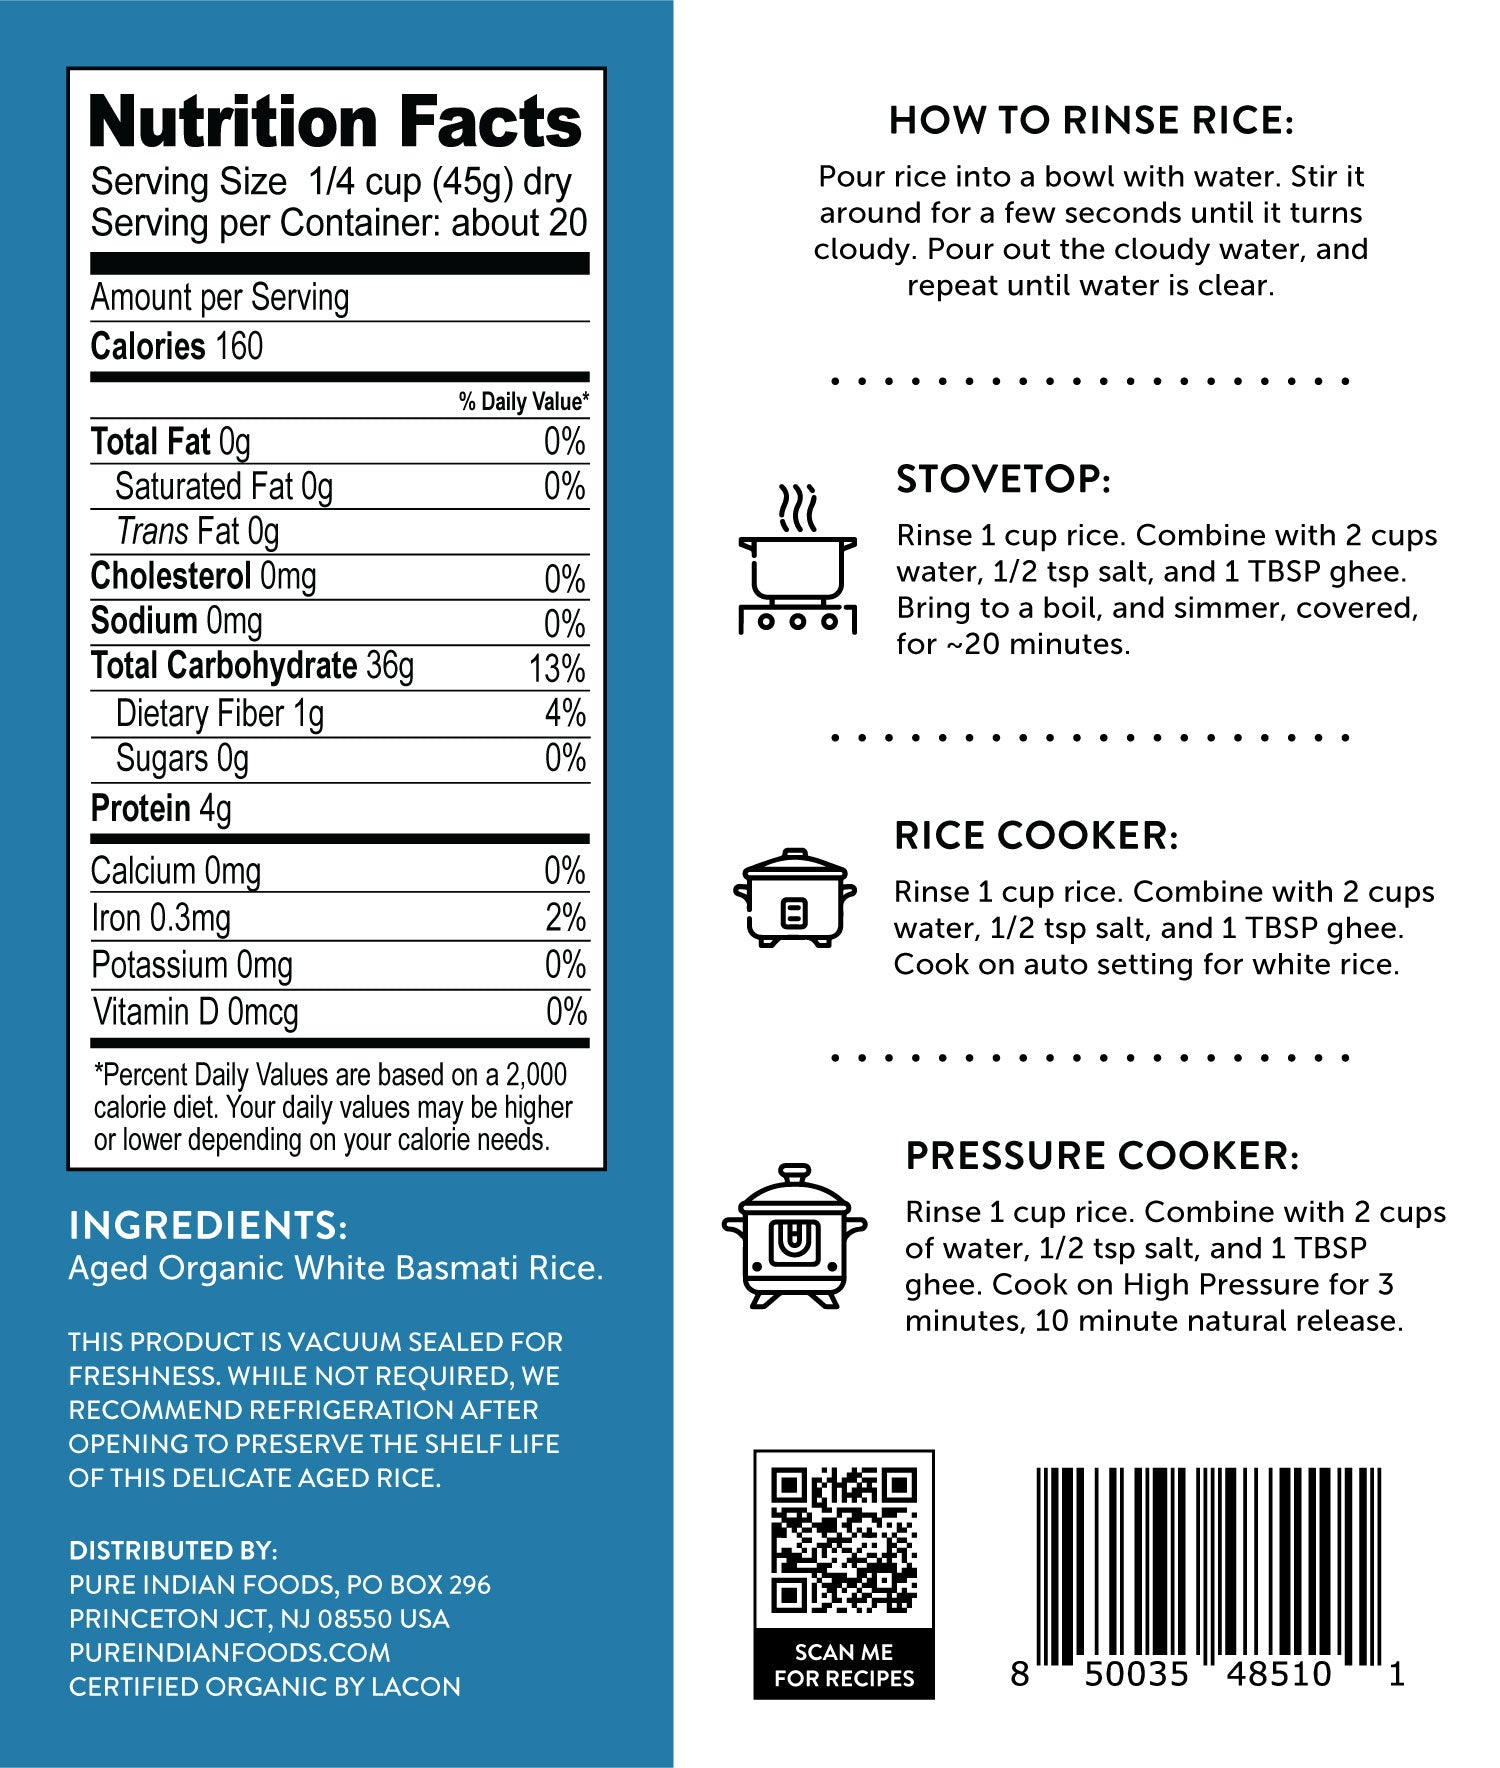 Back label of package of Pure Indian Foods Organic Basmati Rice, showing nutrition facts and cooking instructions.